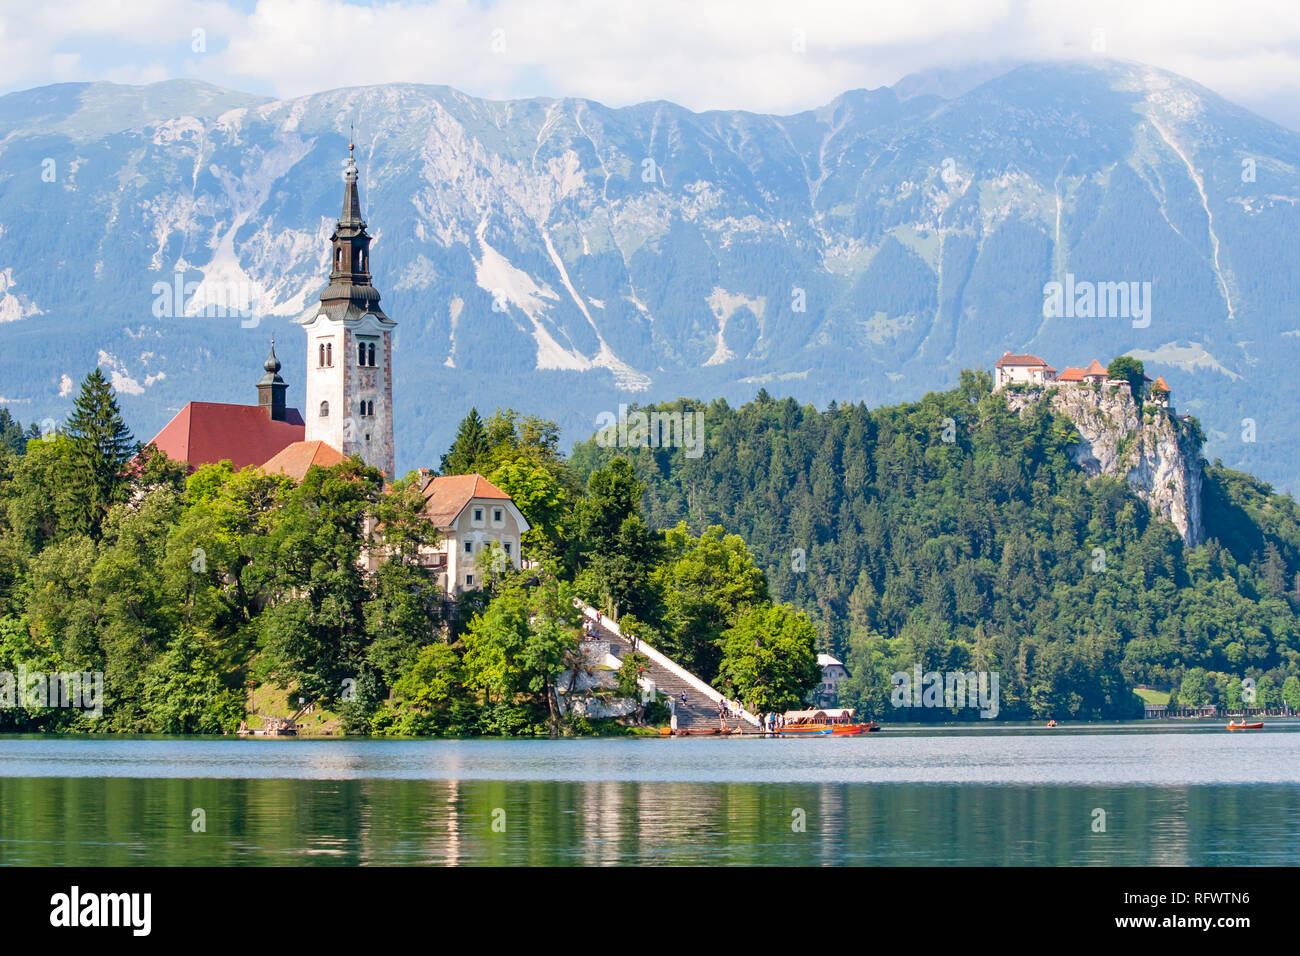 Tiny island with a church, a castle on a crag, and mountain views, Lake Bled, Slovenia, Europe Stock Photo